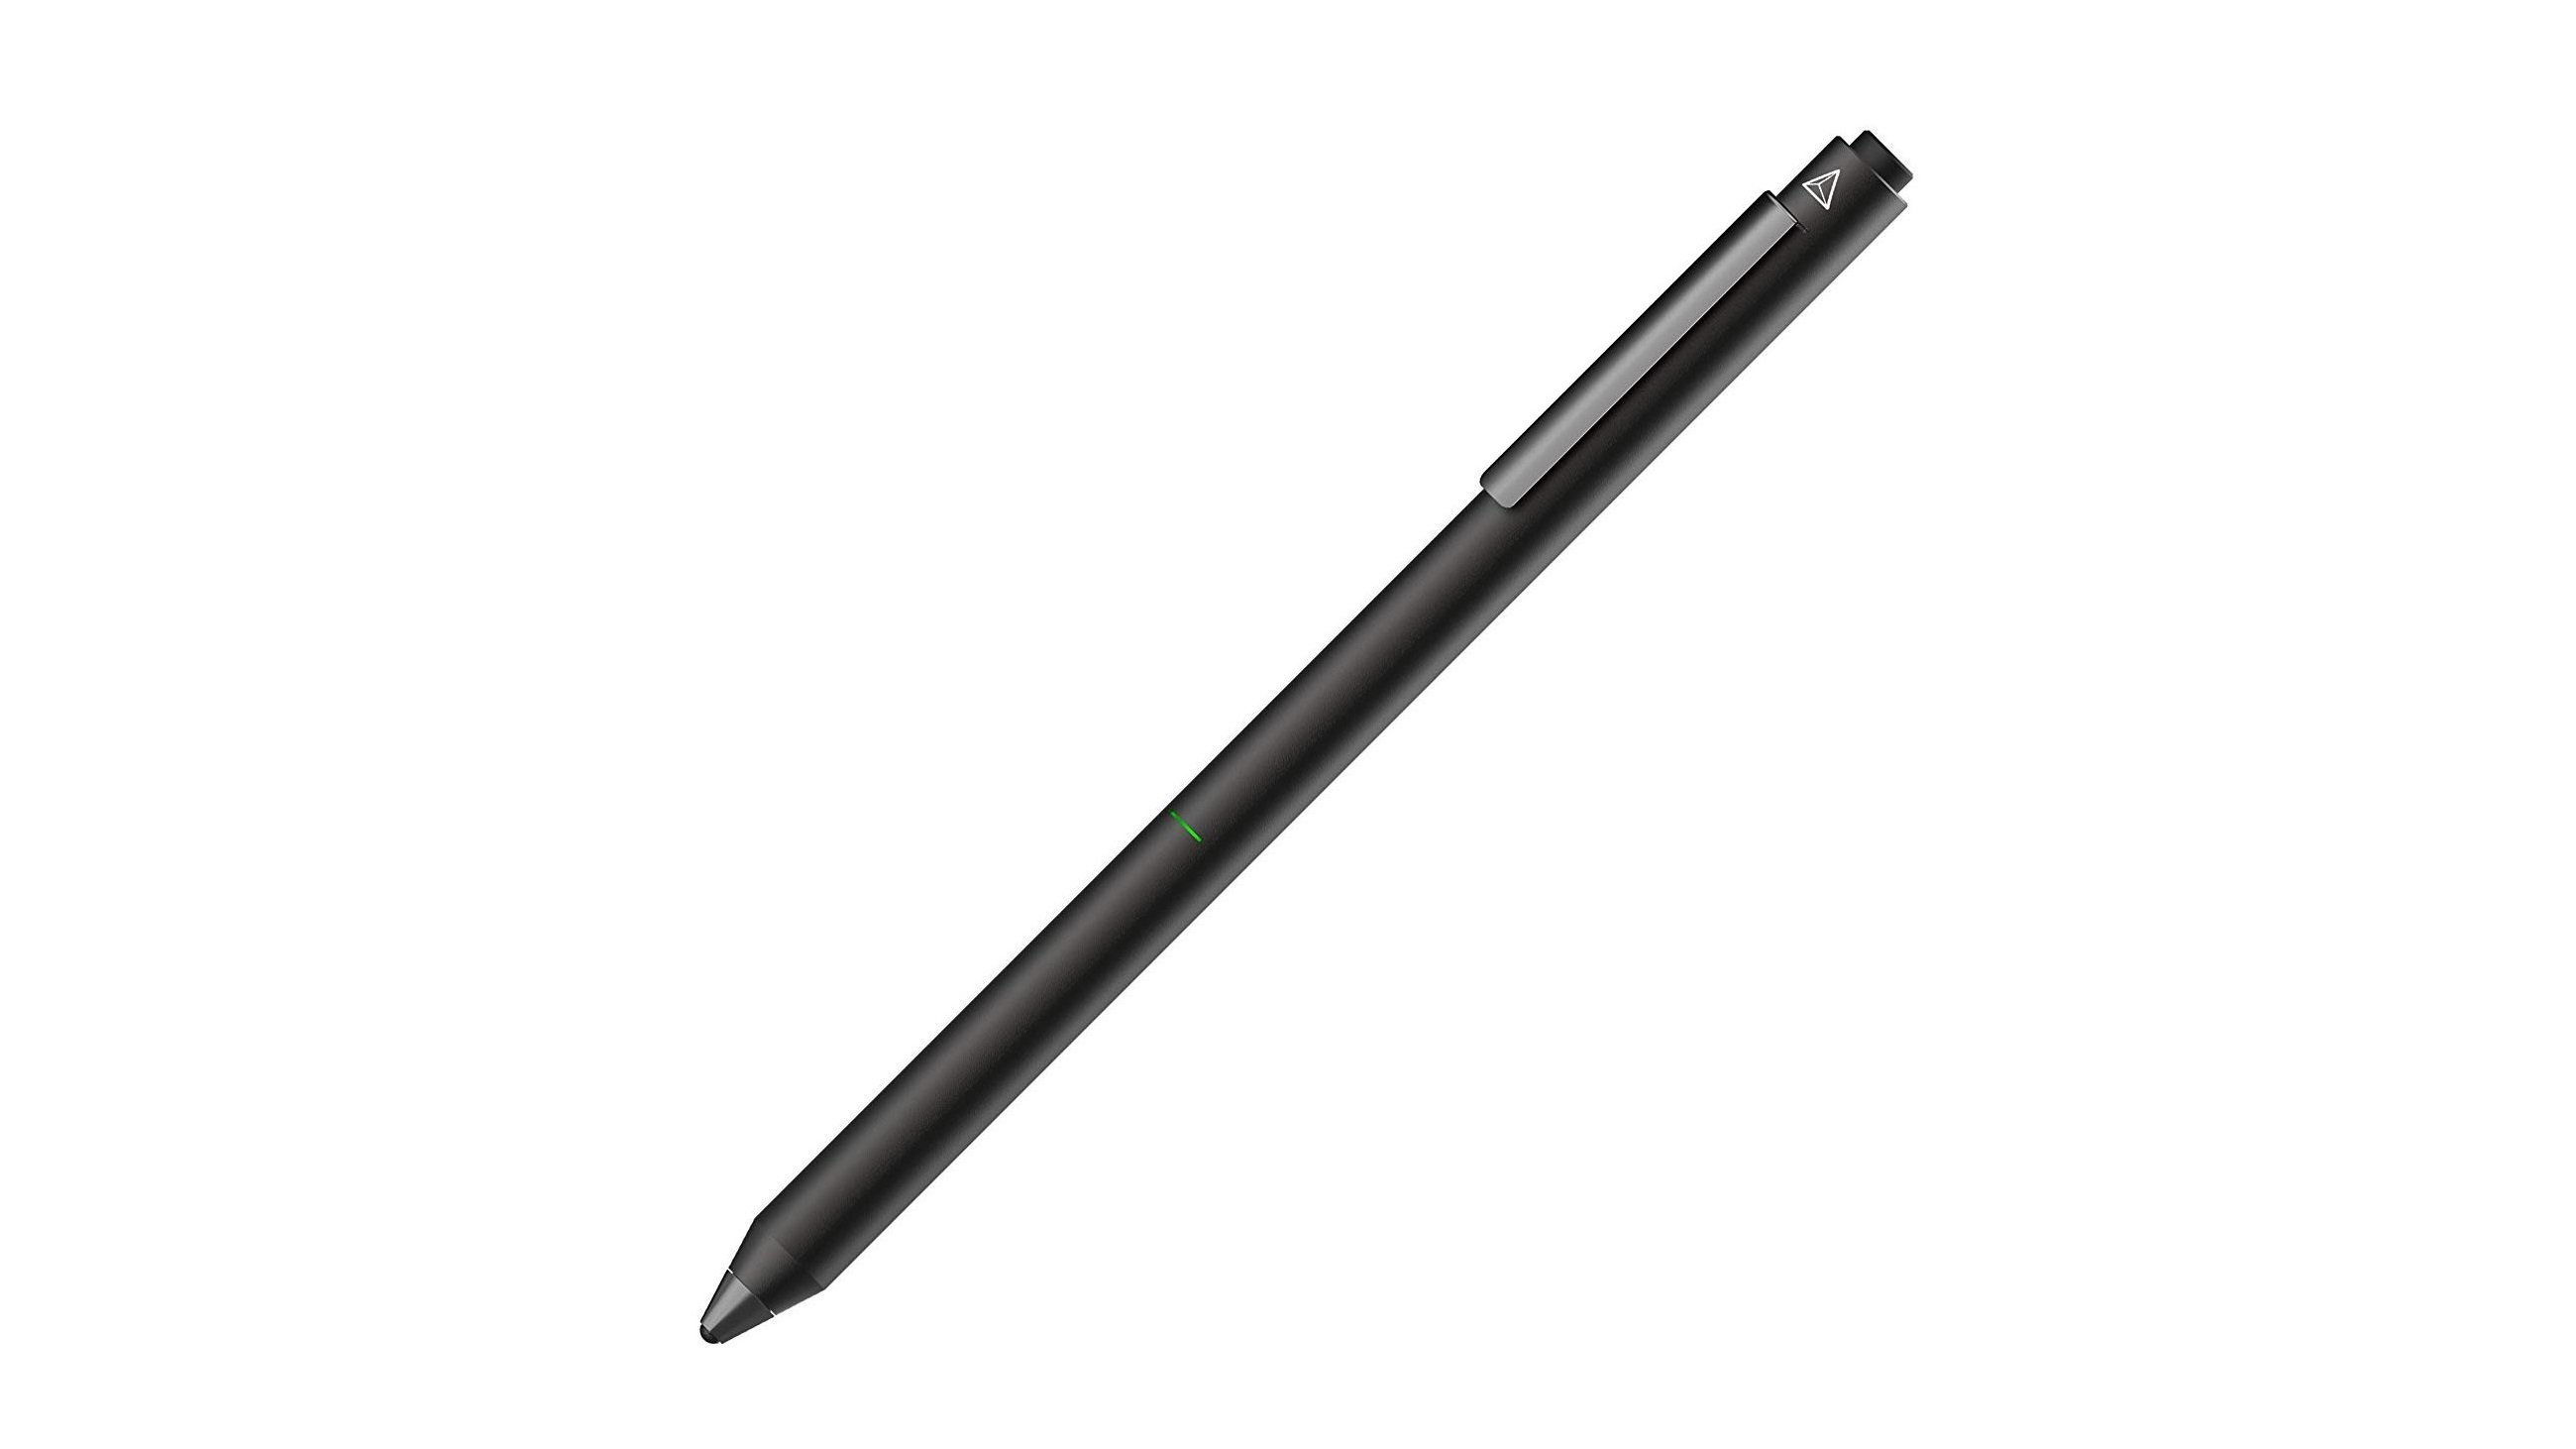 Best stylus for Android: Adonit Dash 3